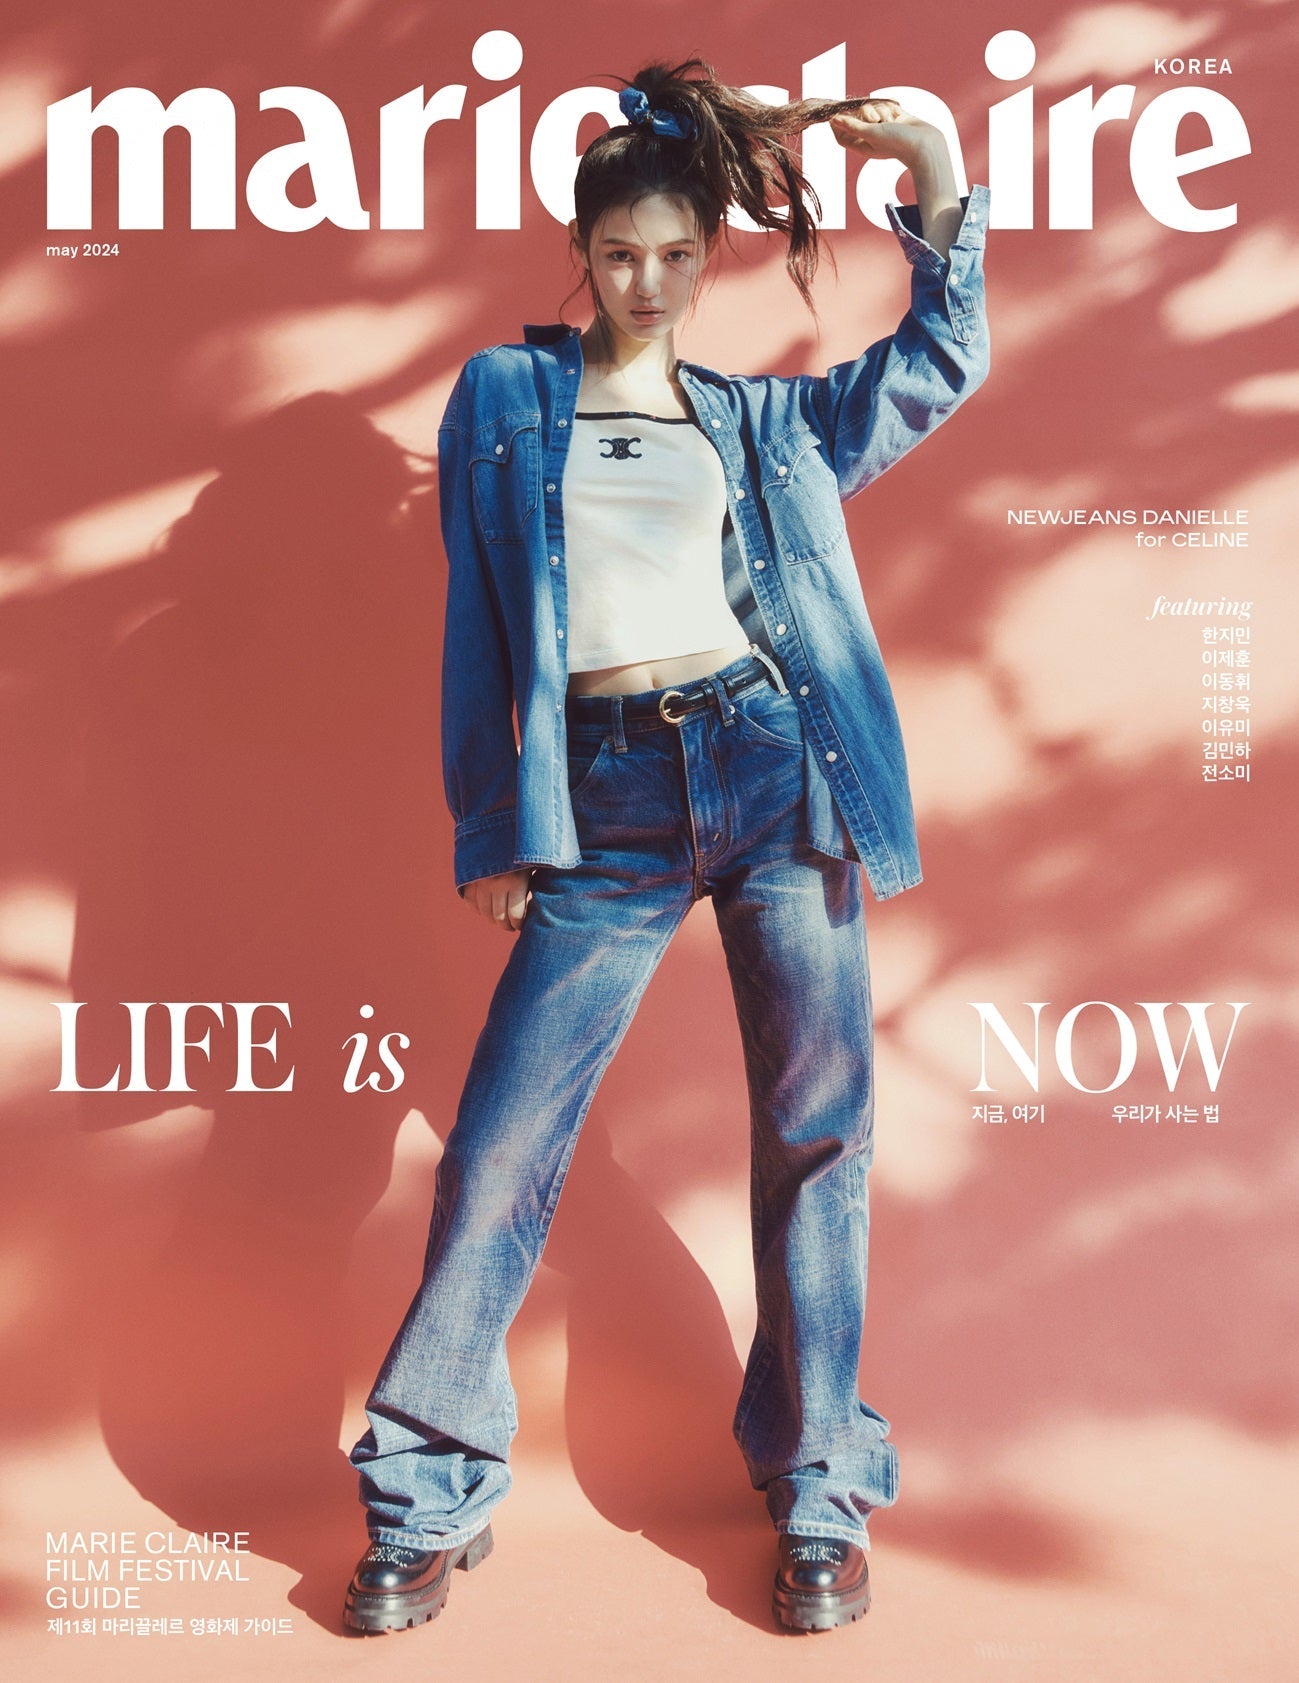 NEWJEANS DANIELLE MARIE CLAIRE 2024 MAY ISSUE C - COKODIVE